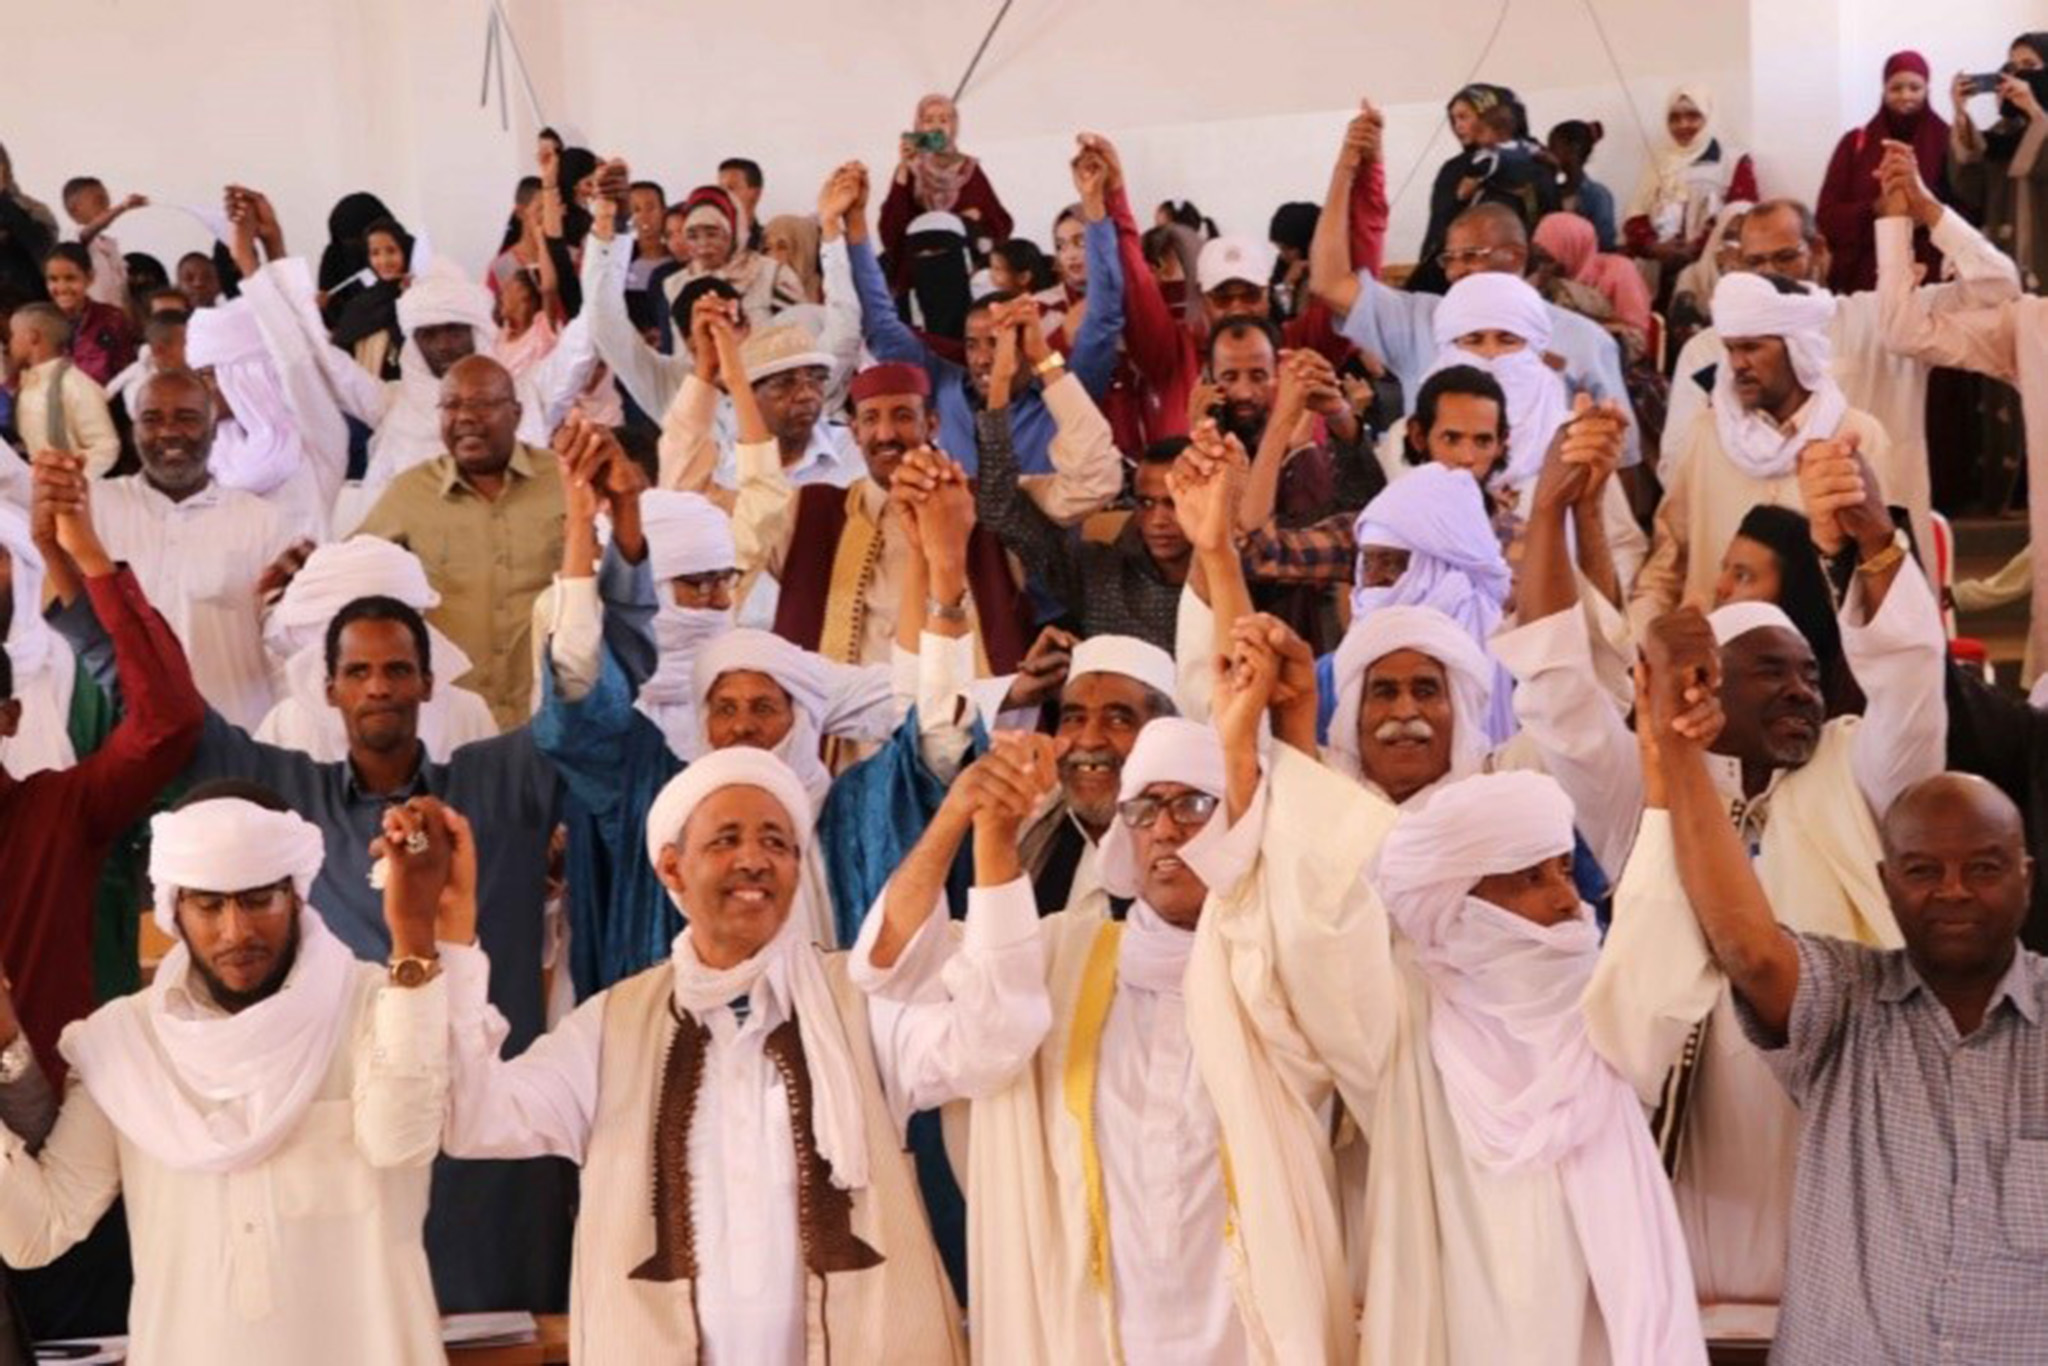 Members of different tribes in Ubari publicly commit to peace on International Peace Day, Ubari, Libya, Sept. 21, 2019.